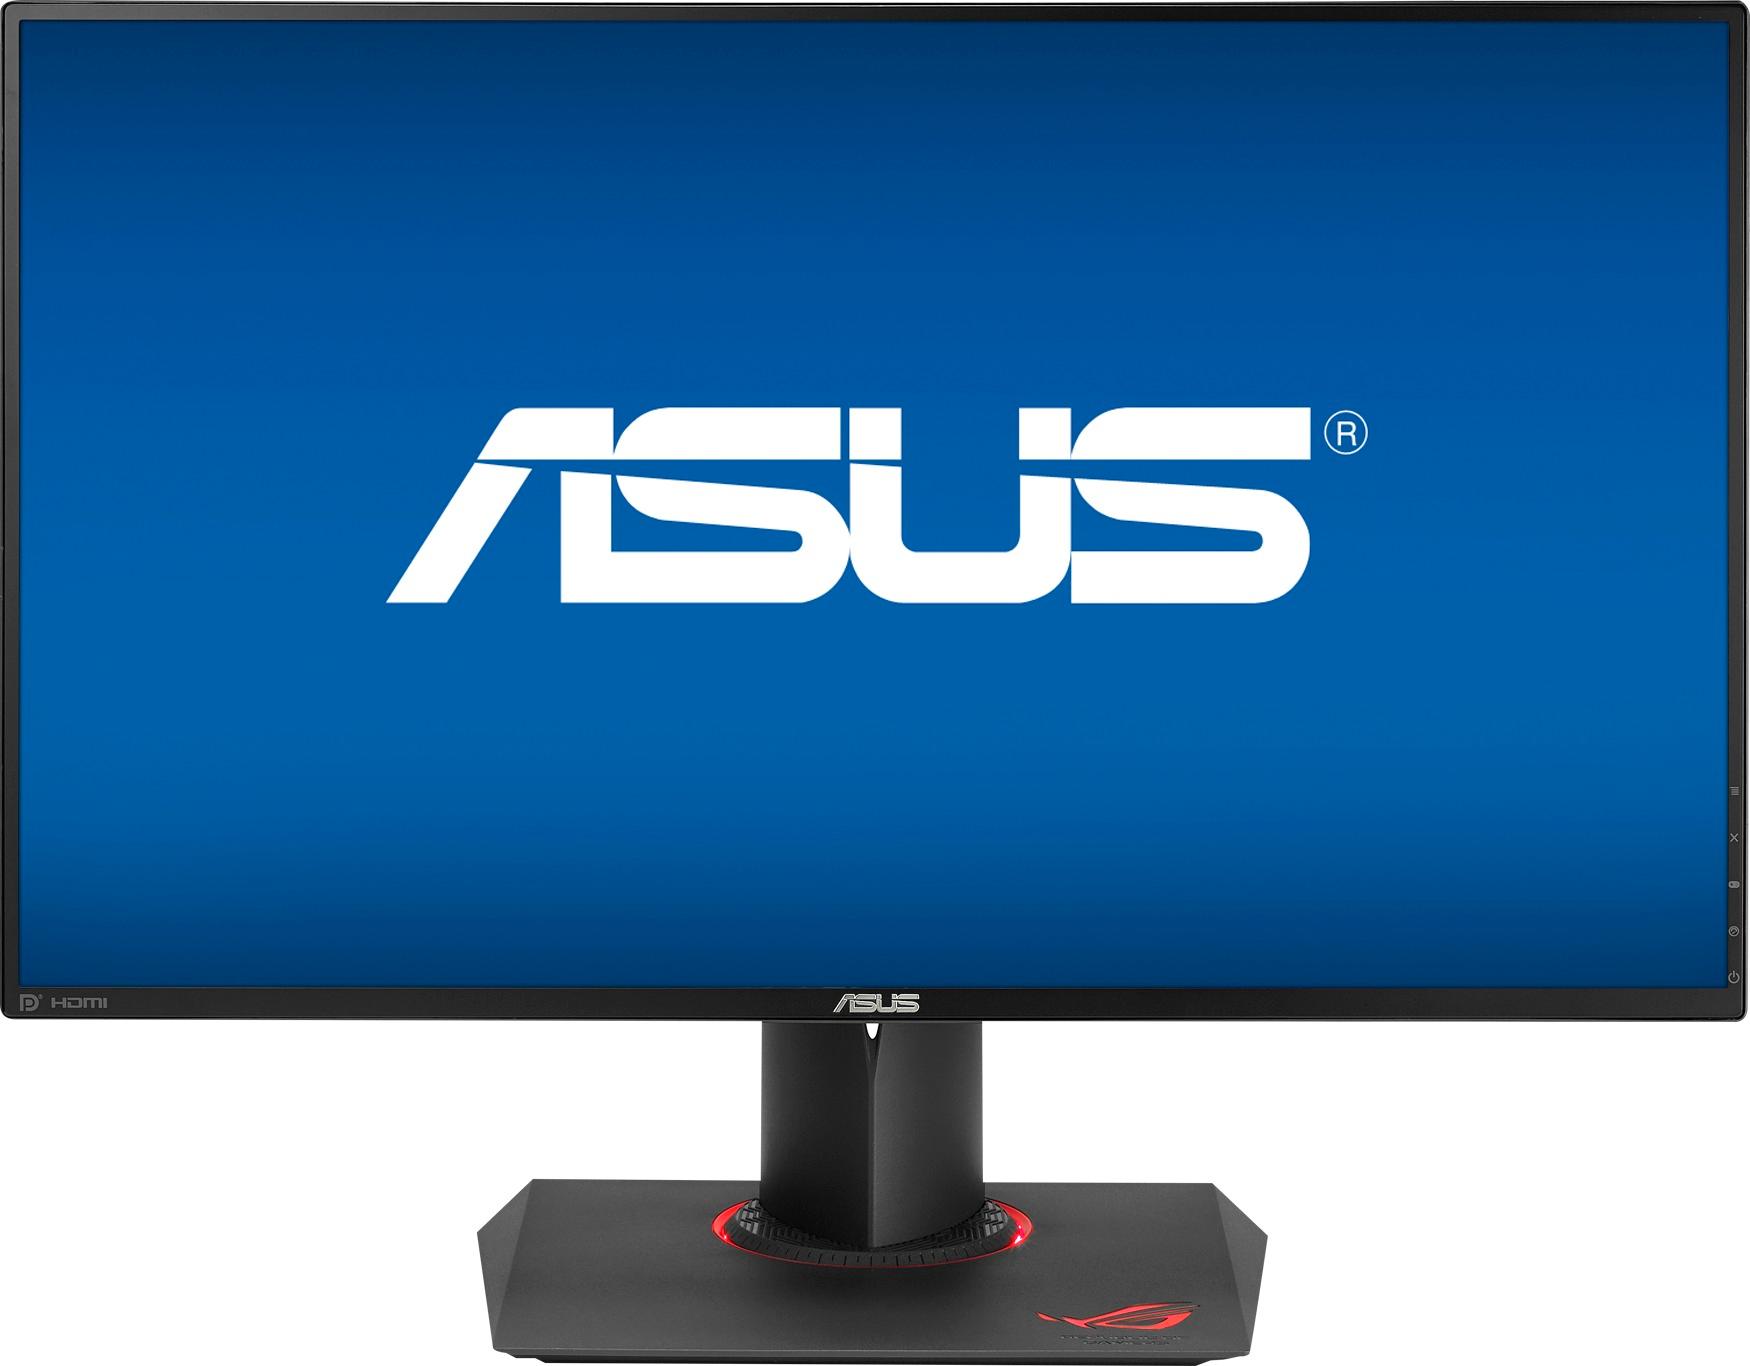 Rotere bjærgning Ny mening ASUS 27" IPS LED HD G-SYNC Monitor Black PG279Q - Best Buy